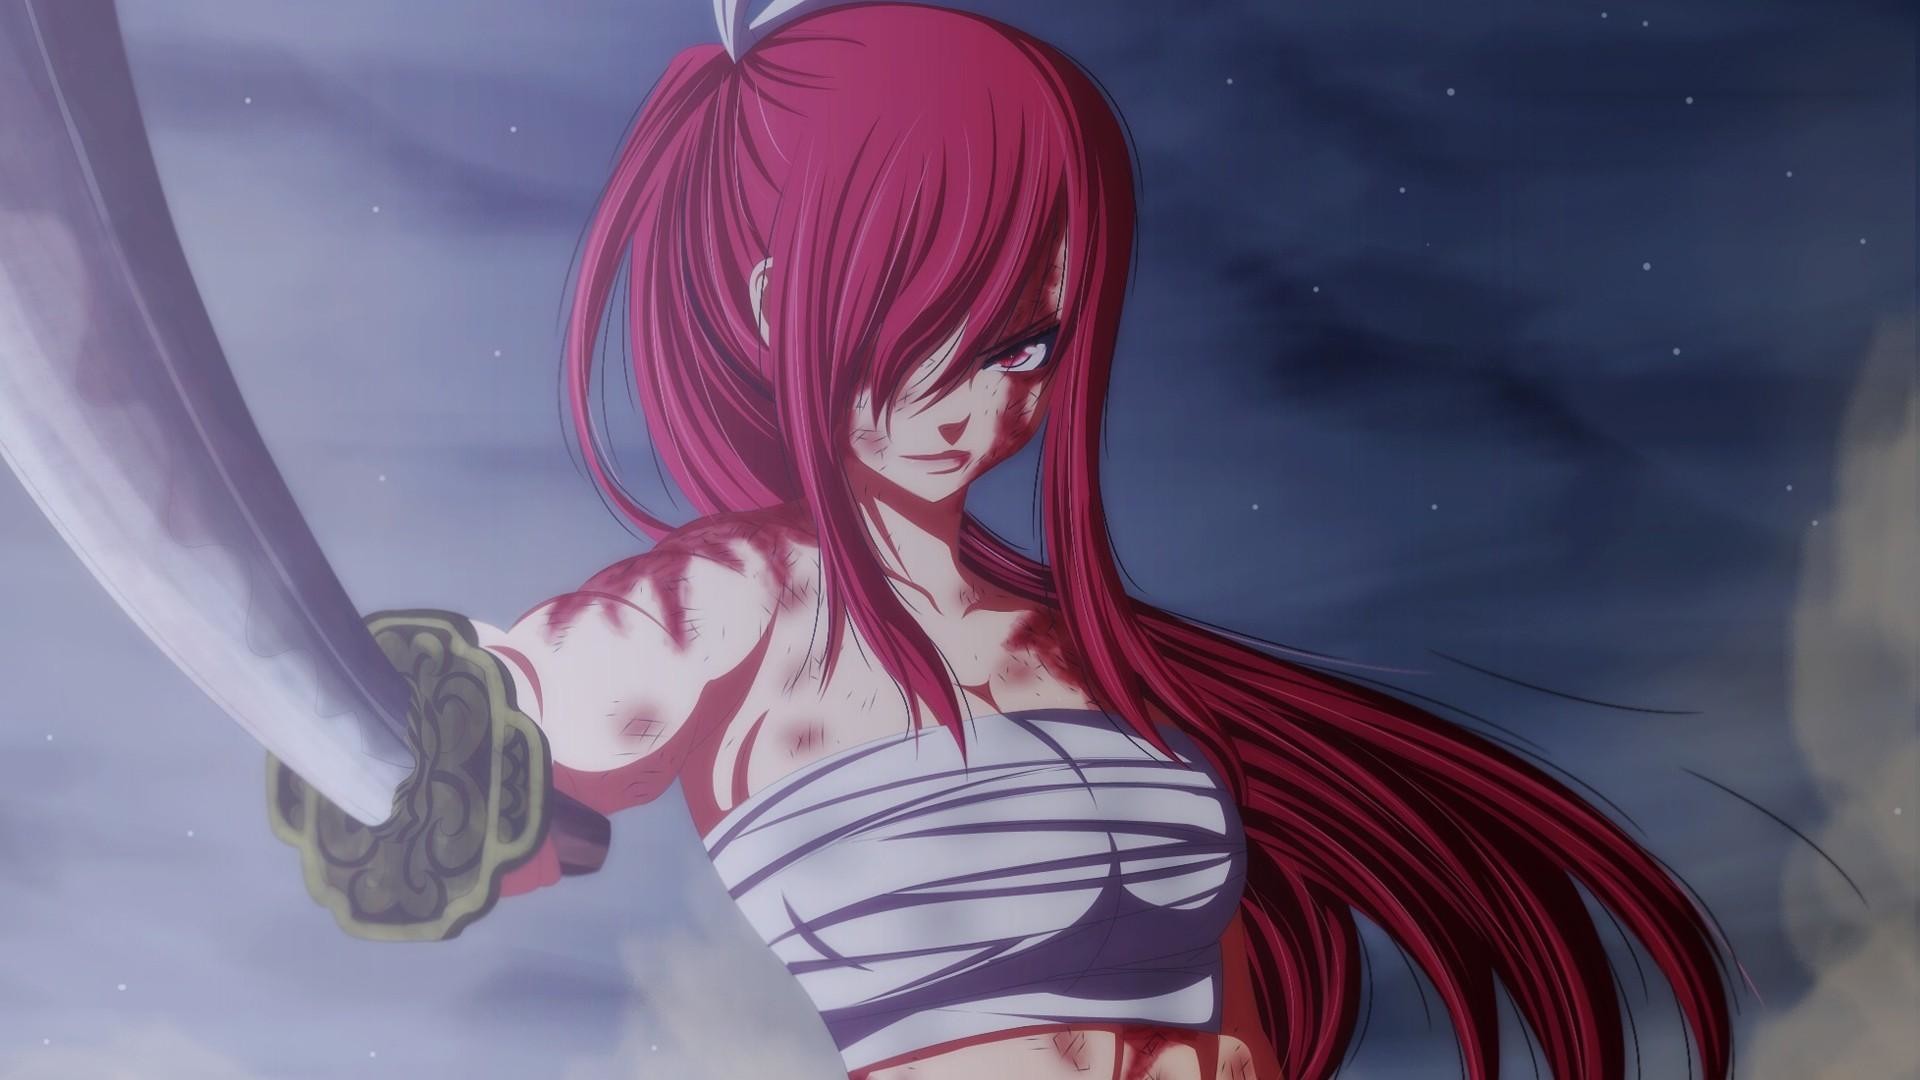 1920x1080 Title. Fairy Tail - Erza Scarlet